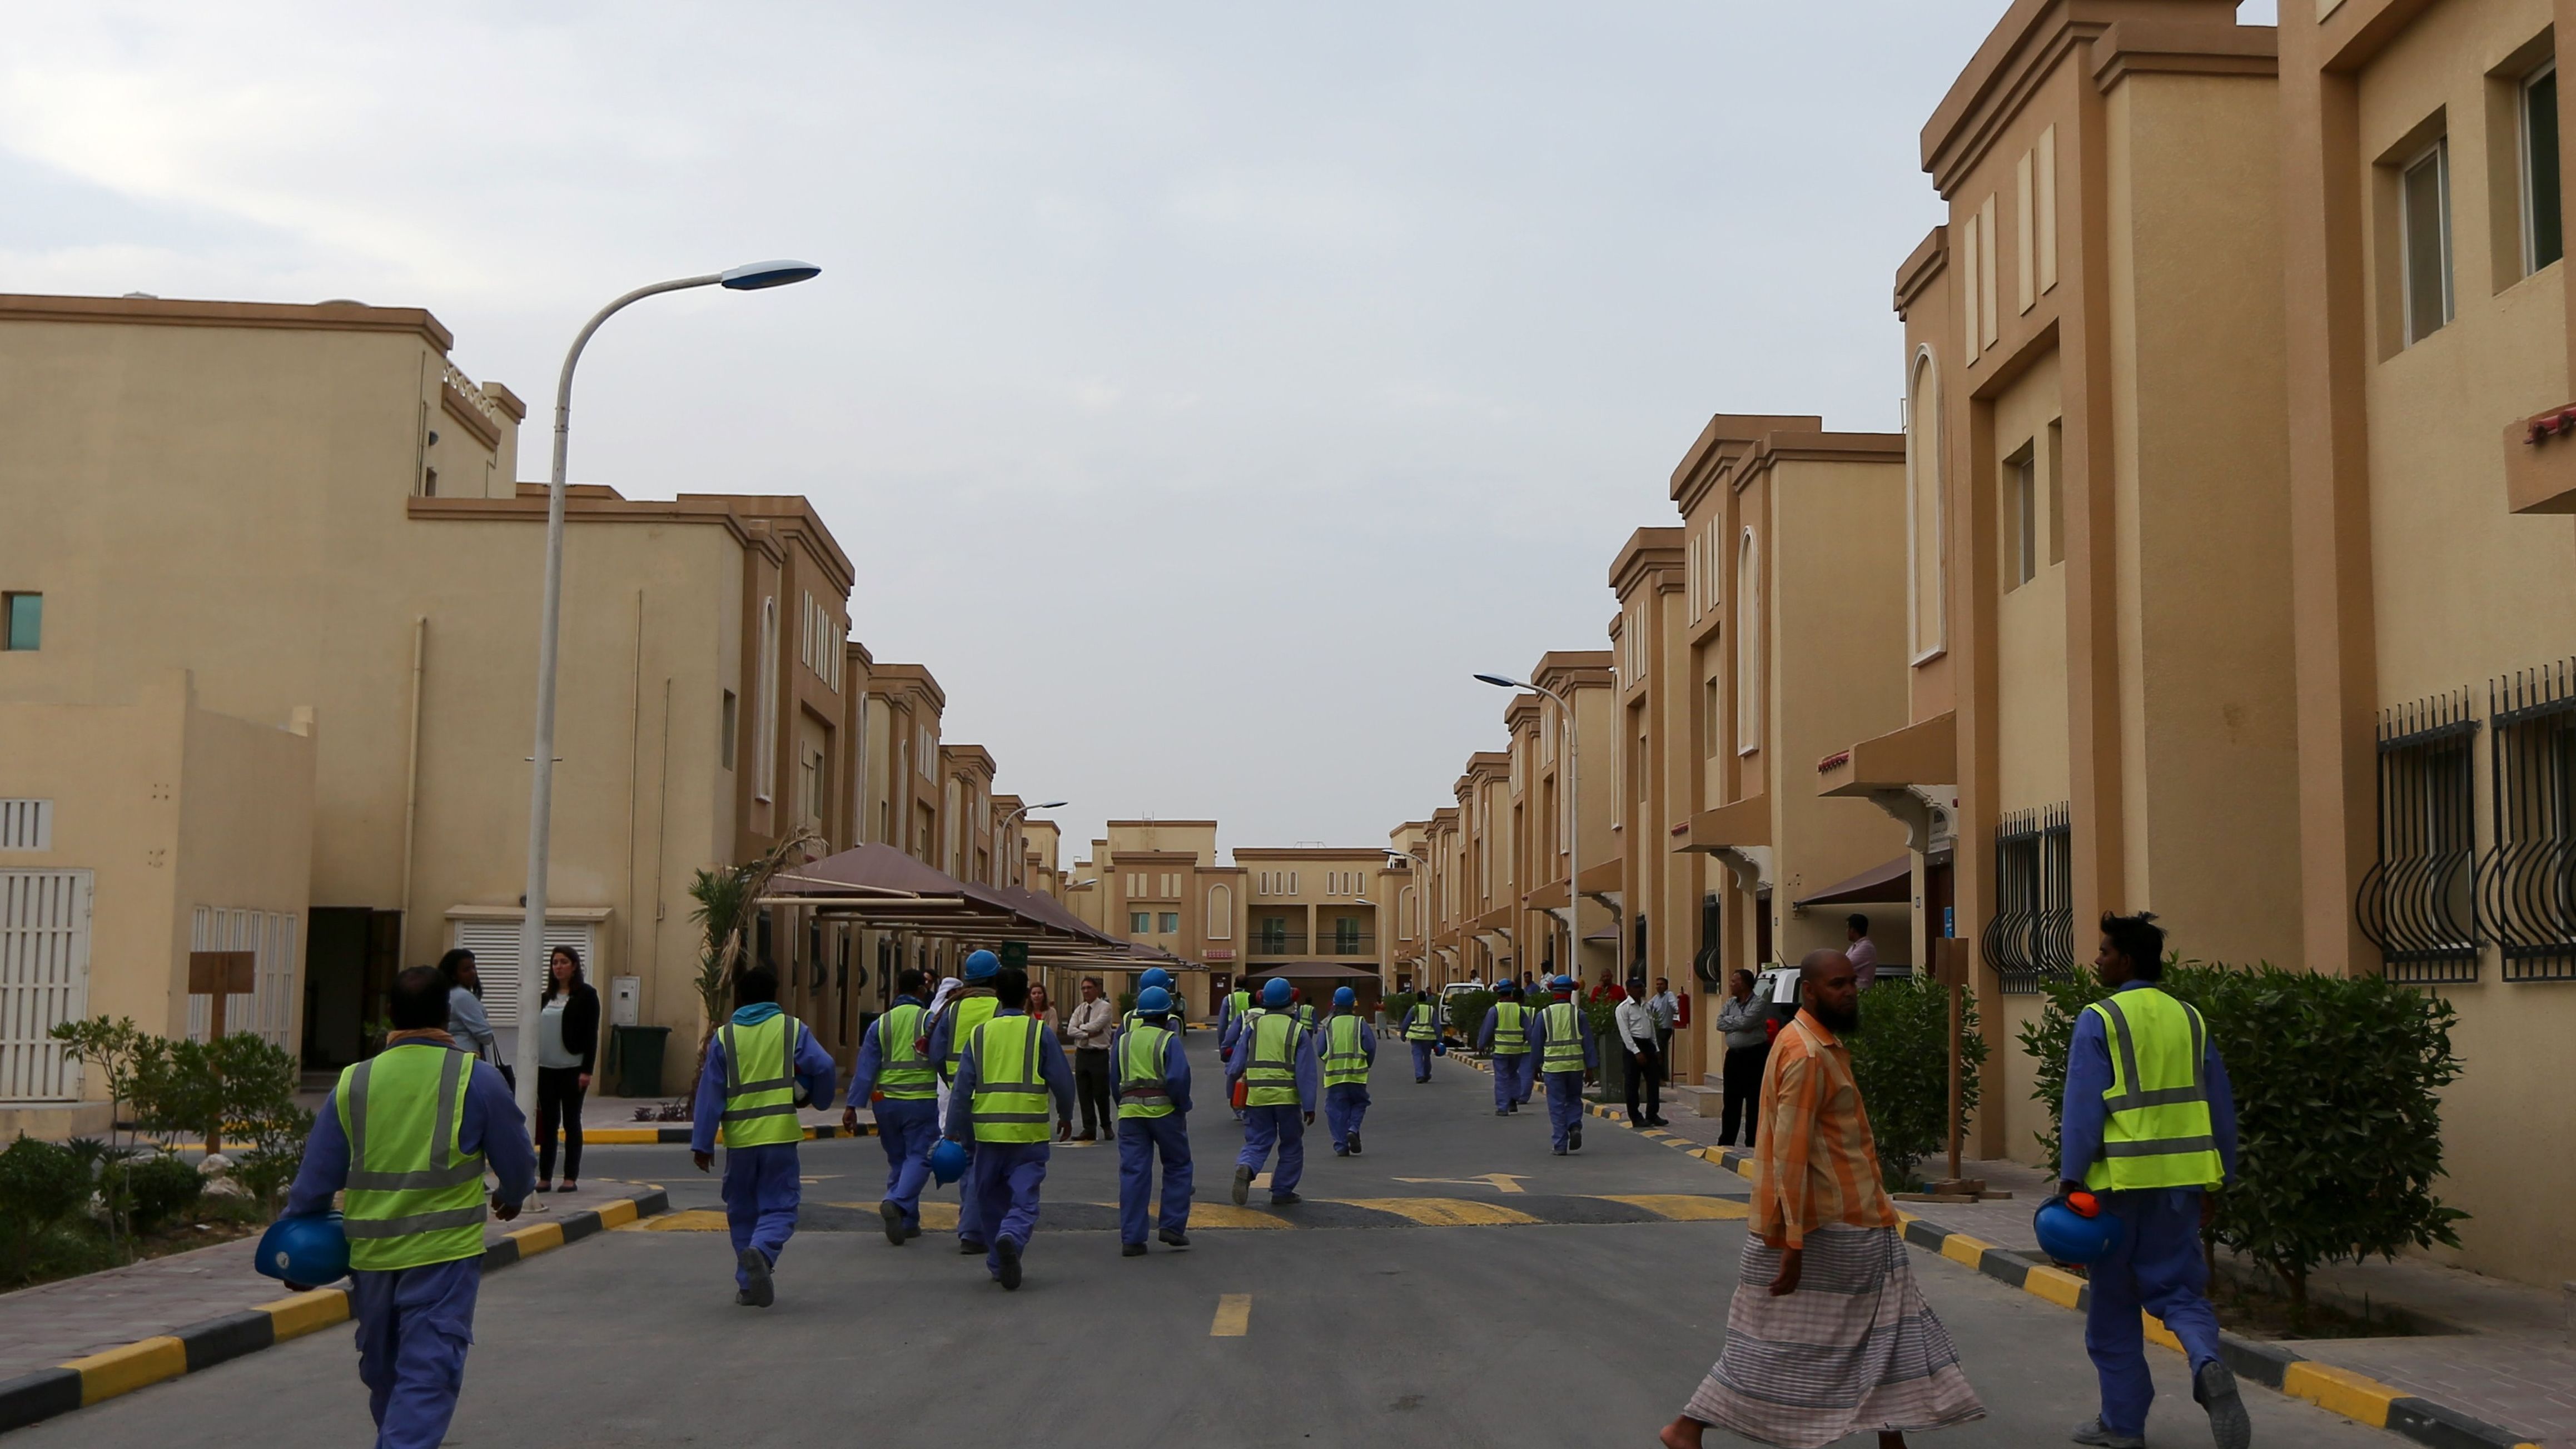 Foreign laborers working on the construction site of the al-Wakrah football stadium, one of the Qatar's 2022 World Cup stadiums, walk back to their accomodation. 